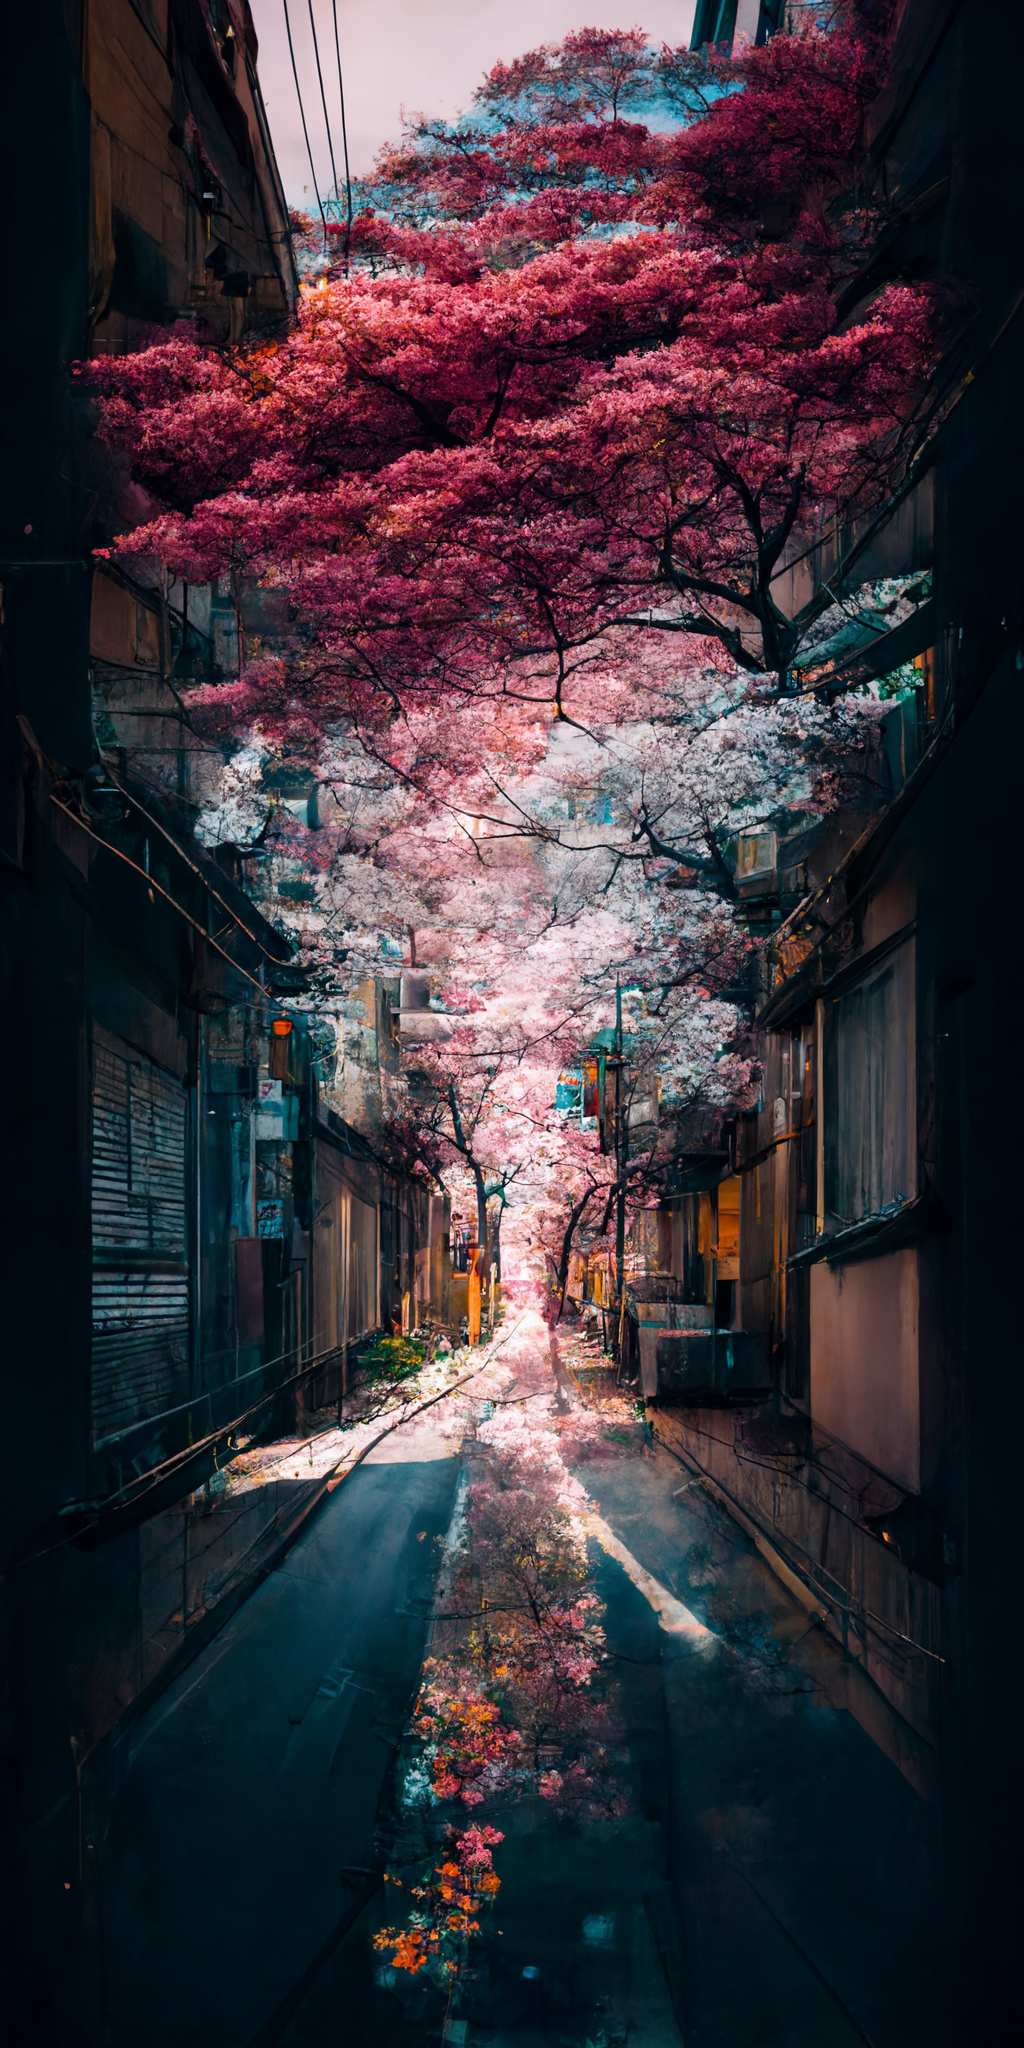 Bluewing_an_alley_in_Tokyo_with_cherry_blossoms_Sony_a7_III_Top_4d807ce1-0d65-4334-8582-0fe056744585.jpeg